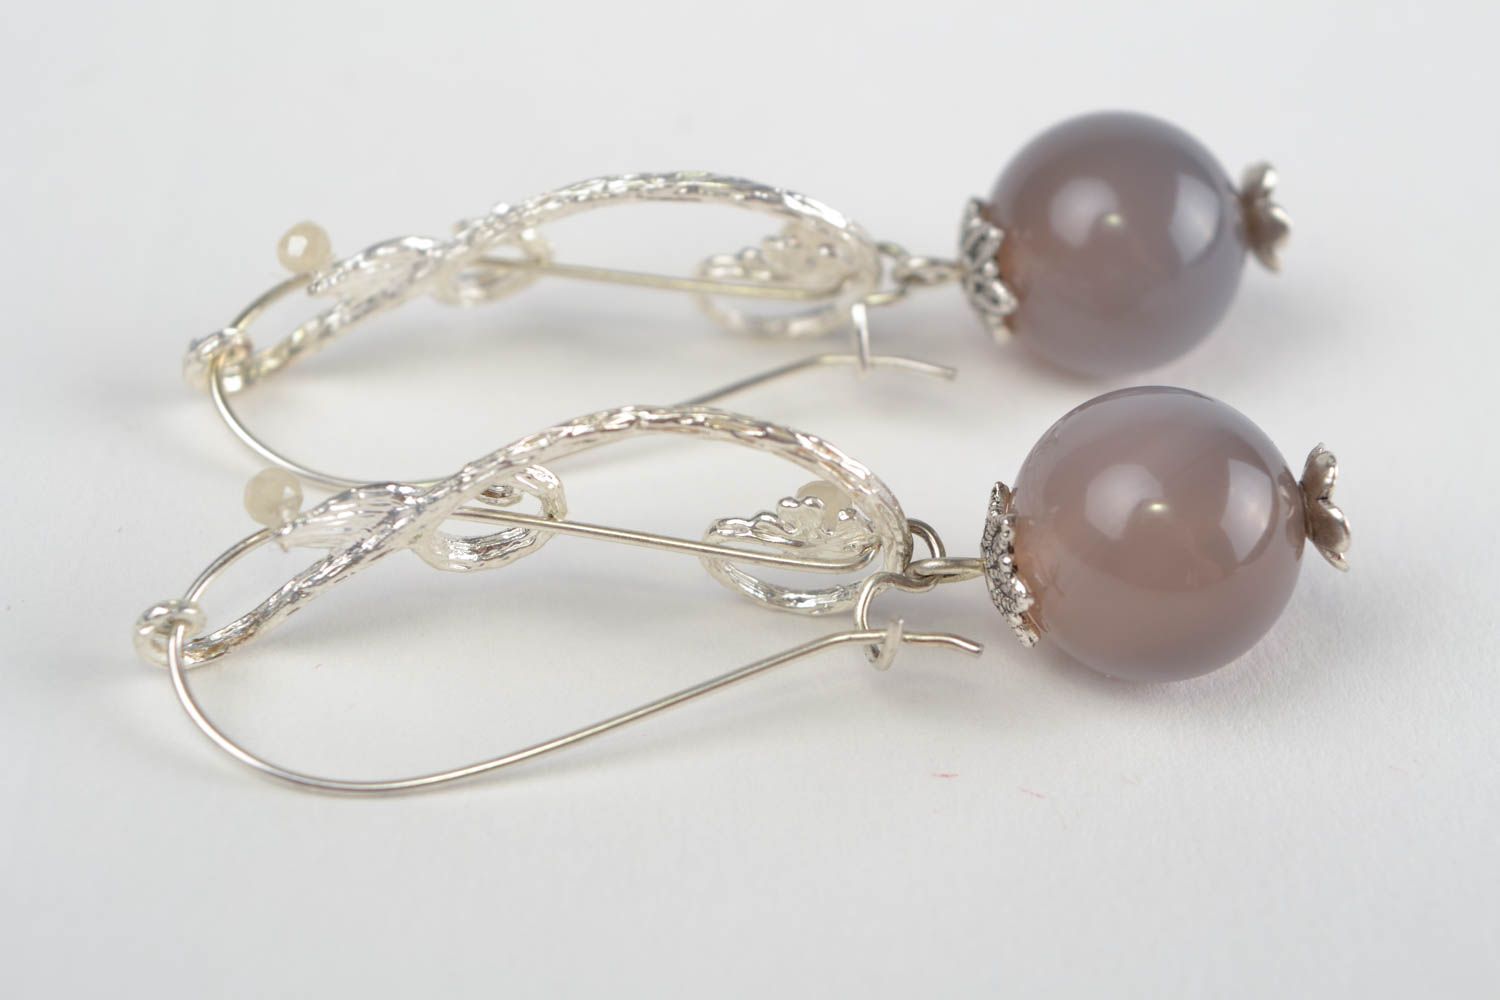 Handmade exquisite dangling earrings with fancy fittings and gray agate beads photo 3